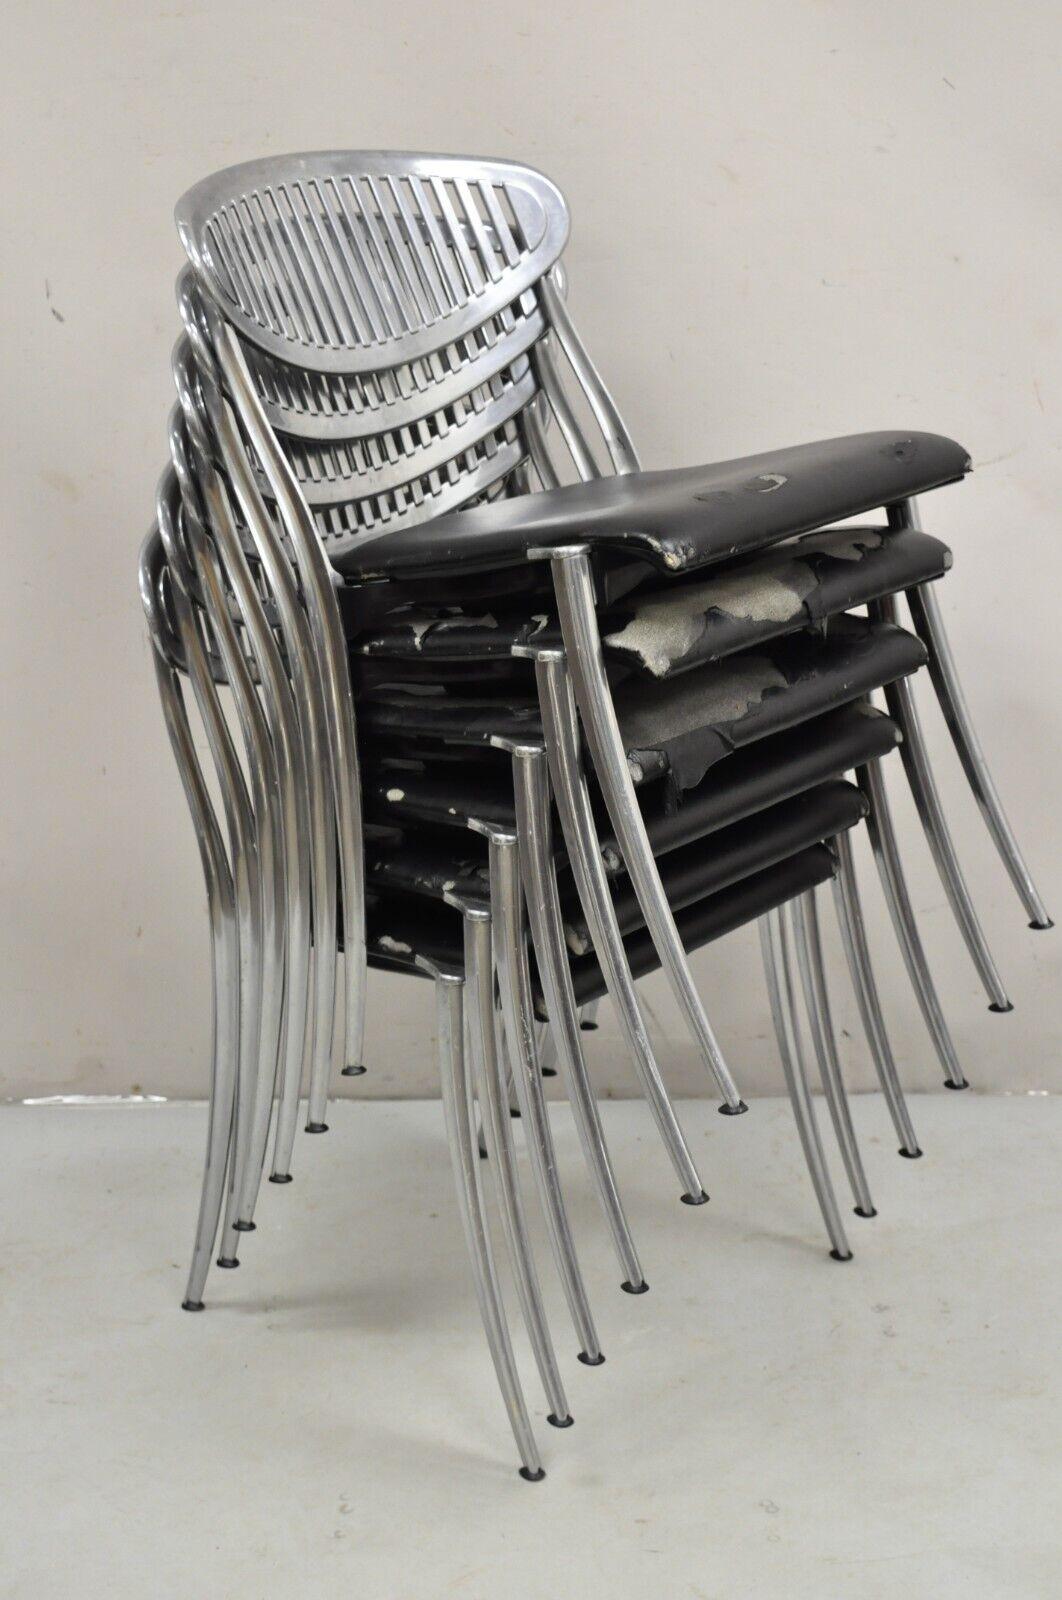 Vintage Coro Luigi Origlia designed Italian Modern Sculpted Aluminum Dining Chairs with Stackable Frames - Set of 6. Circa 1980. Measurements: 31